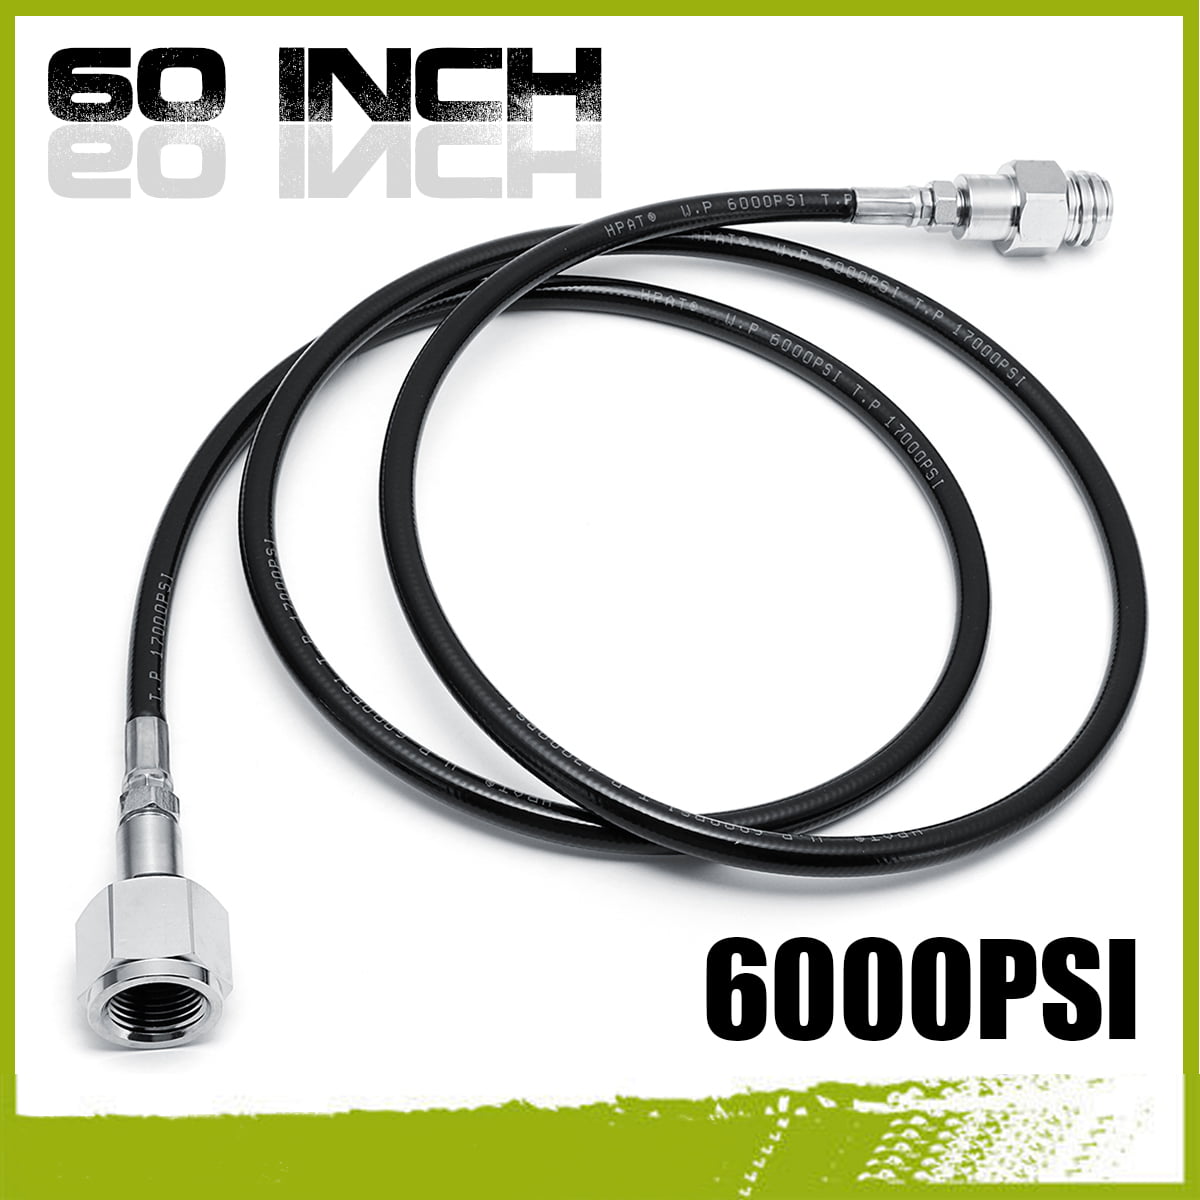 Soda Maker Accessories 60 Inch Soda Club External Hose Adapter to CO2 Tank Compatible with SodaStream CO2 Hose Adapter Kit 